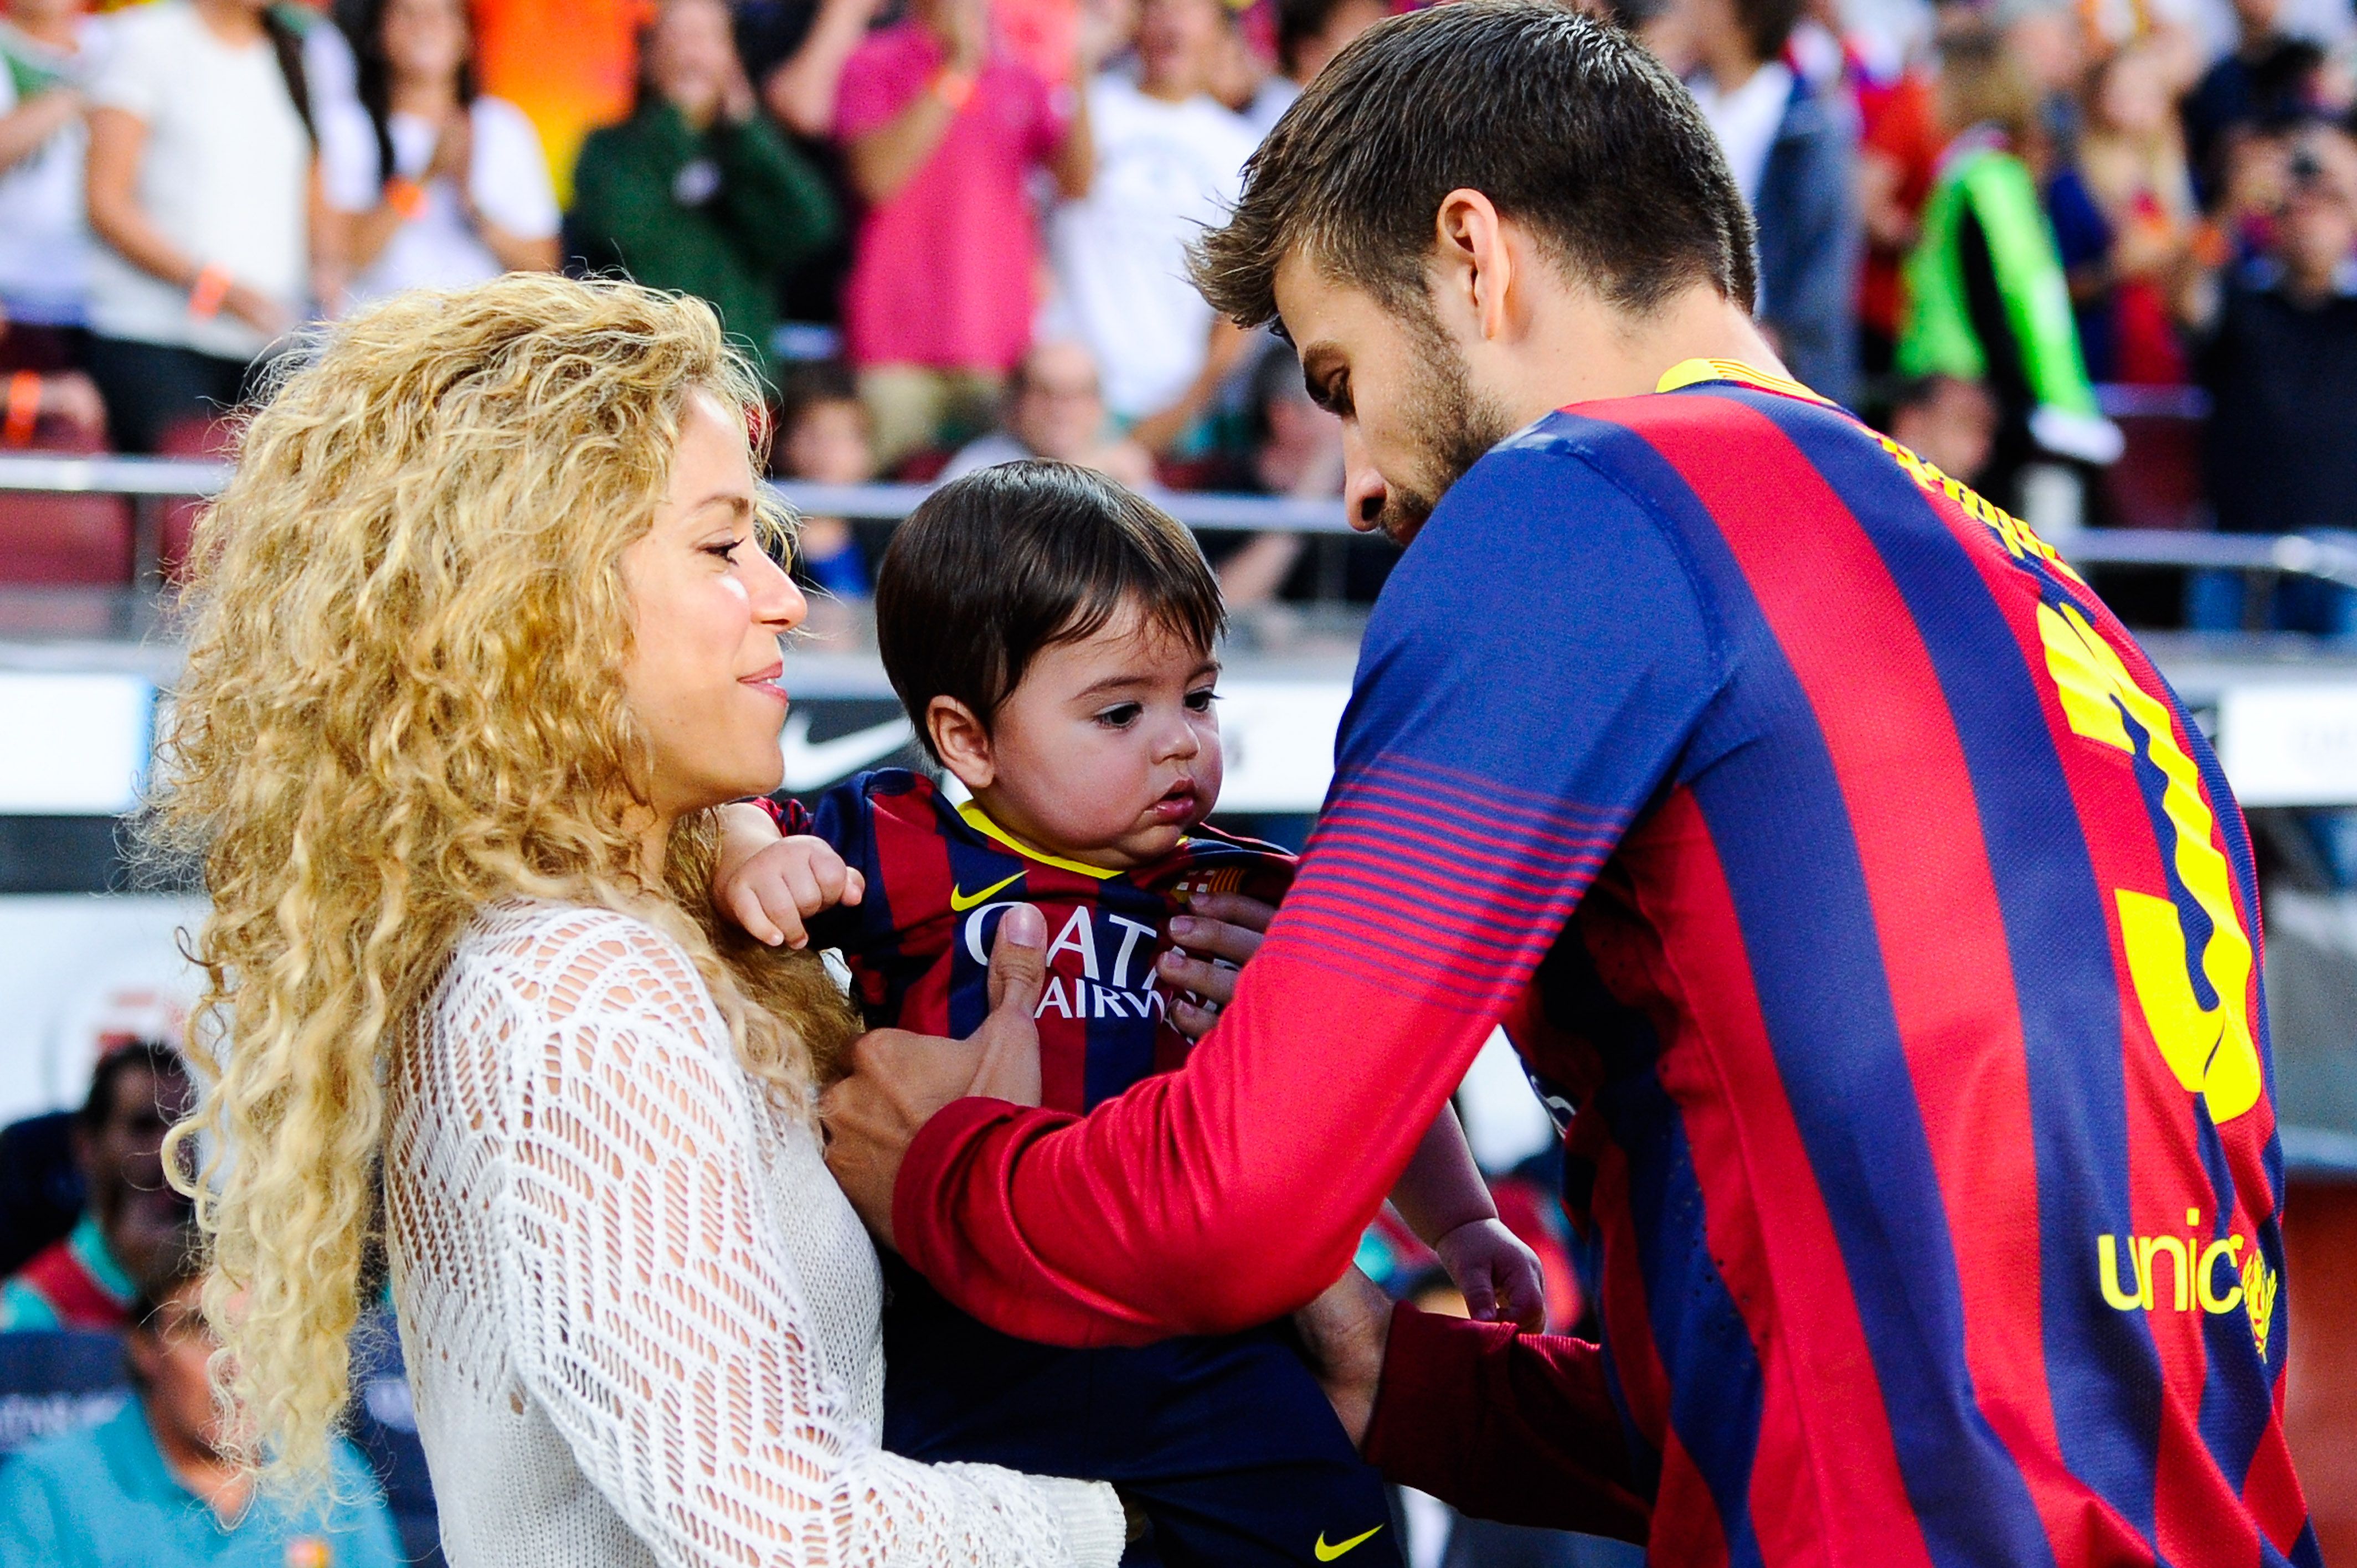 Shakira and Gerard Pique with their son, Milan, during the game between FC Barcelona and Sevilla FC at Camp Nou on September 14, 2013 in Barcelona, Spain. | Source: Getty Images